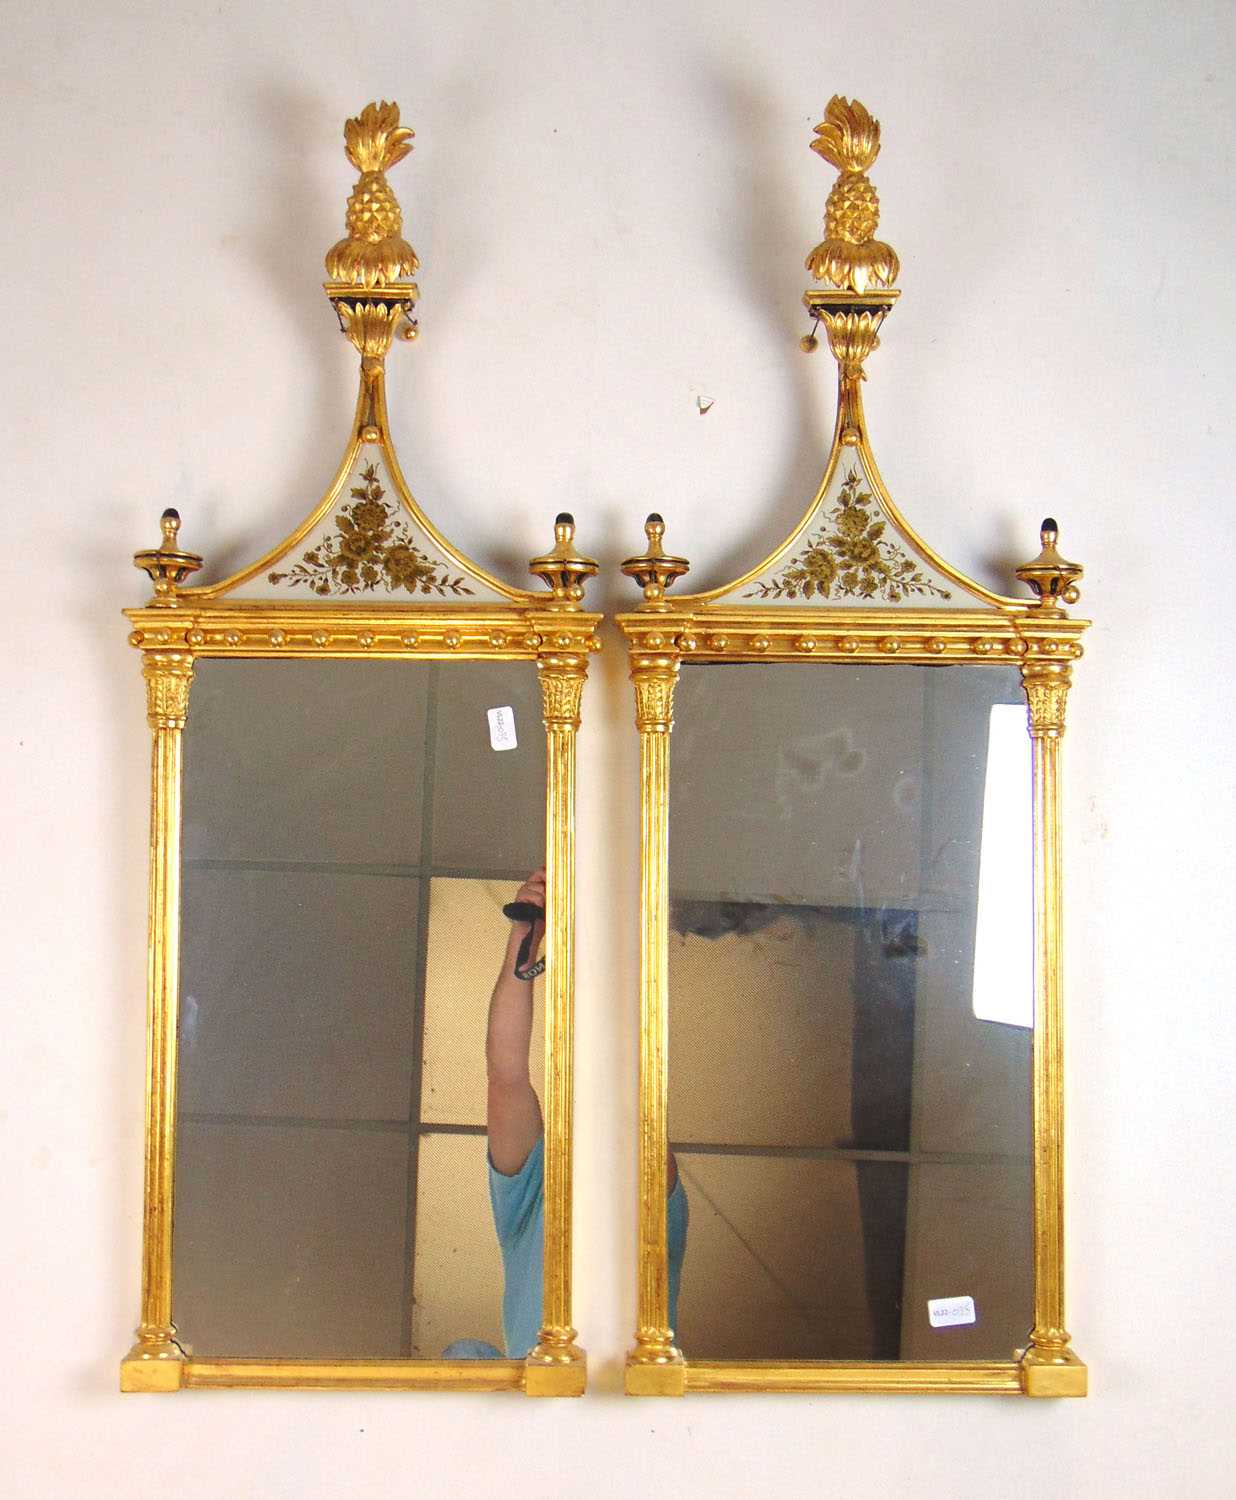 A pair of early 20th century giltwood pier mirrors, the pineapple finial over foliate glass panels